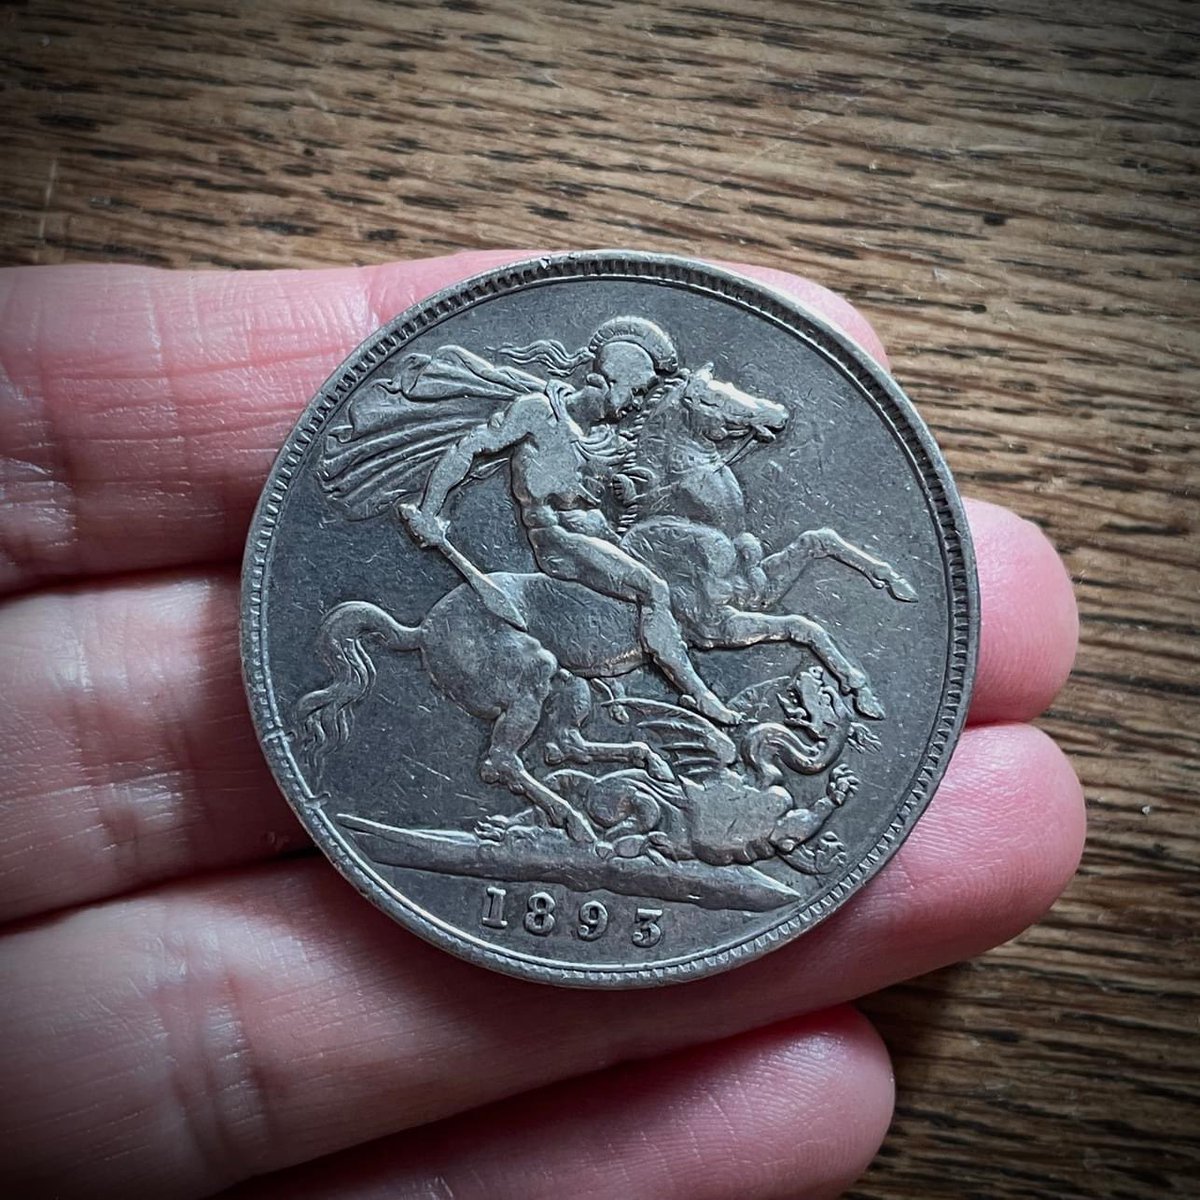 Happy St George's Day
And here is England's patron saint, on the largest coin I've ever found on the foreshore (a Victorian silver crown)

1/5

#Mudlark #mudlarking